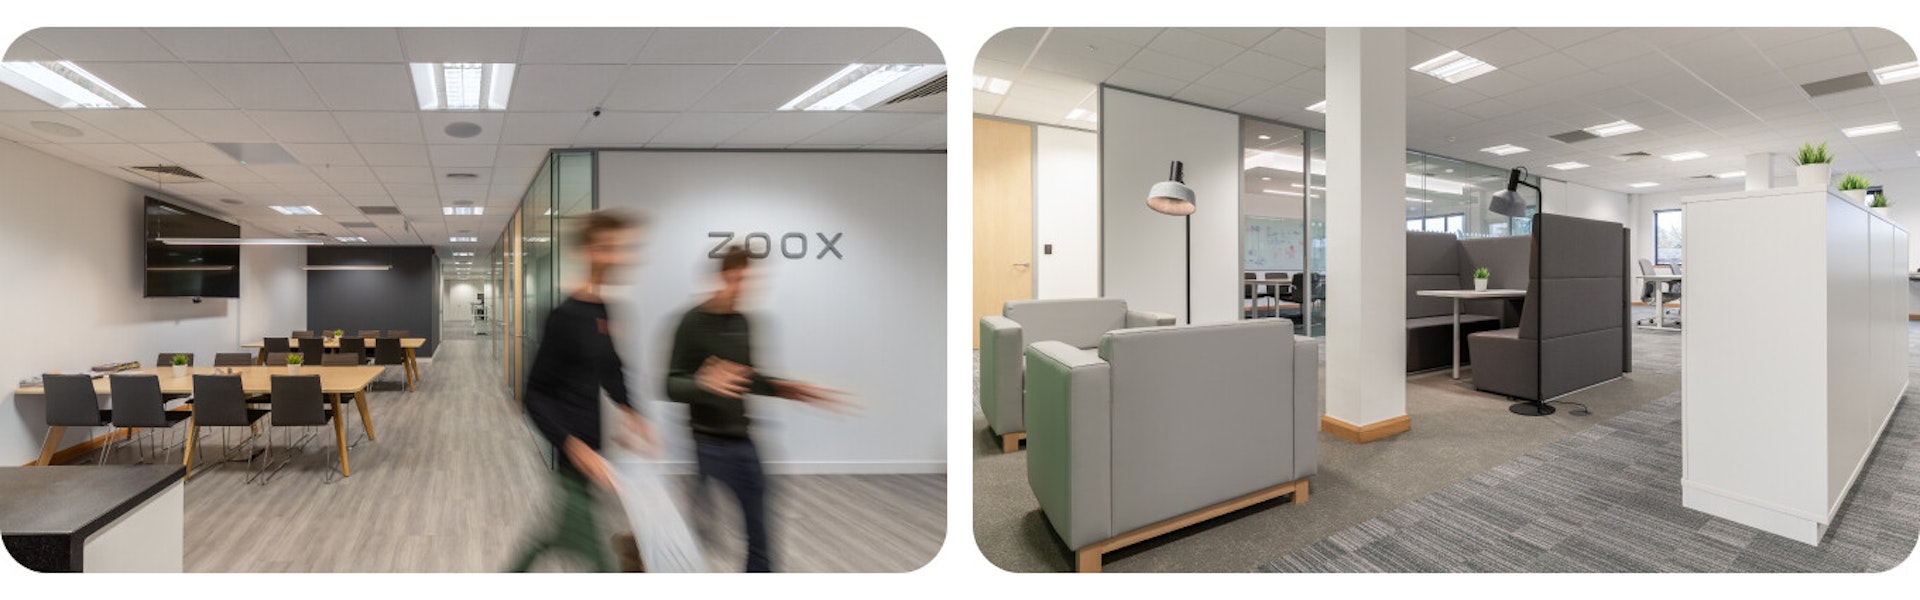 zoox uk office space